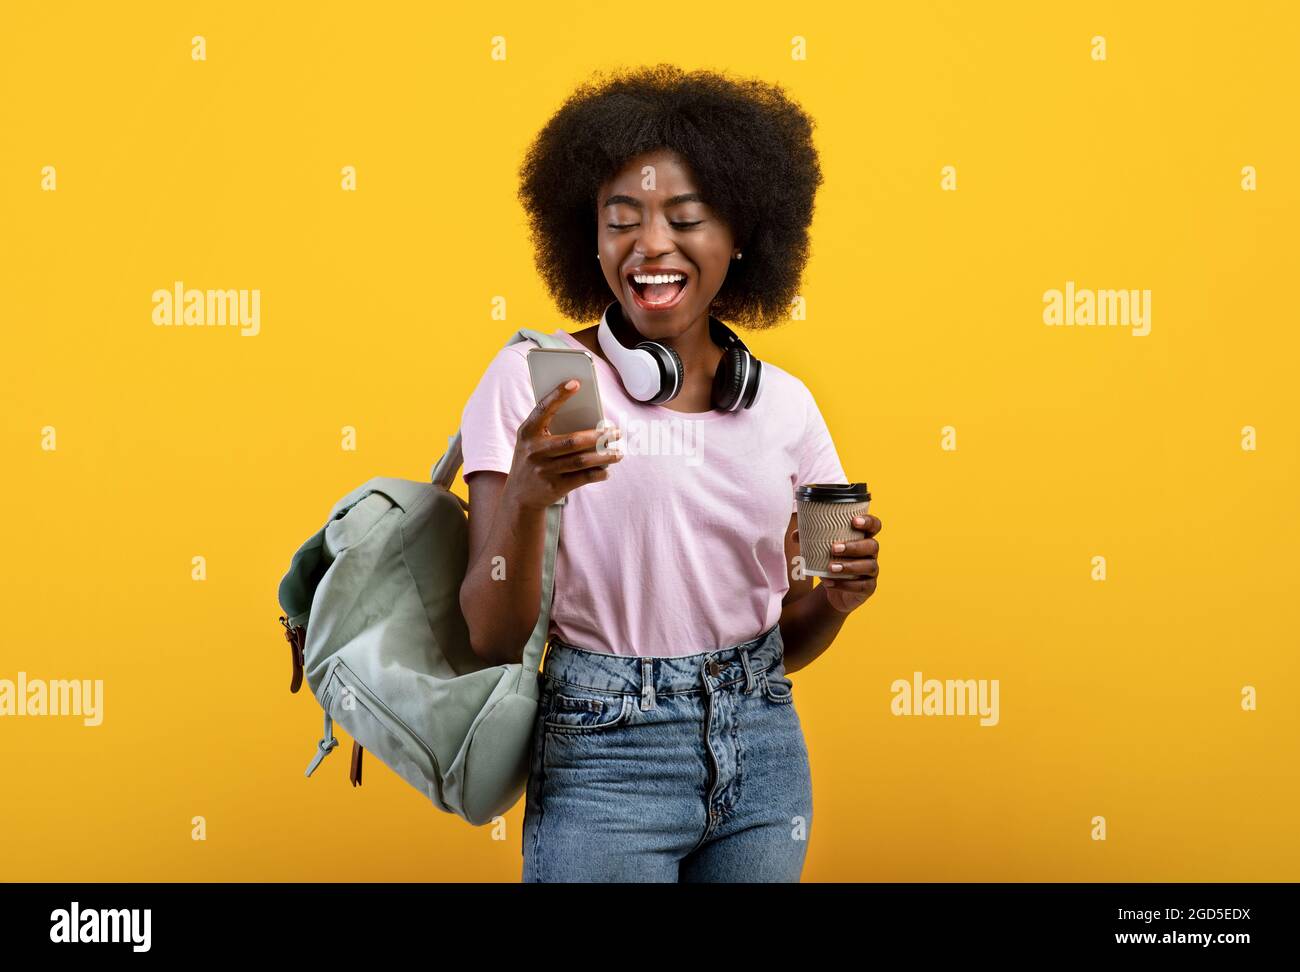 Online education. Happy black lady with backpack, headphones, cellphone and takeaway coffee standing over yellow studio background. Young female stude Stock Photo